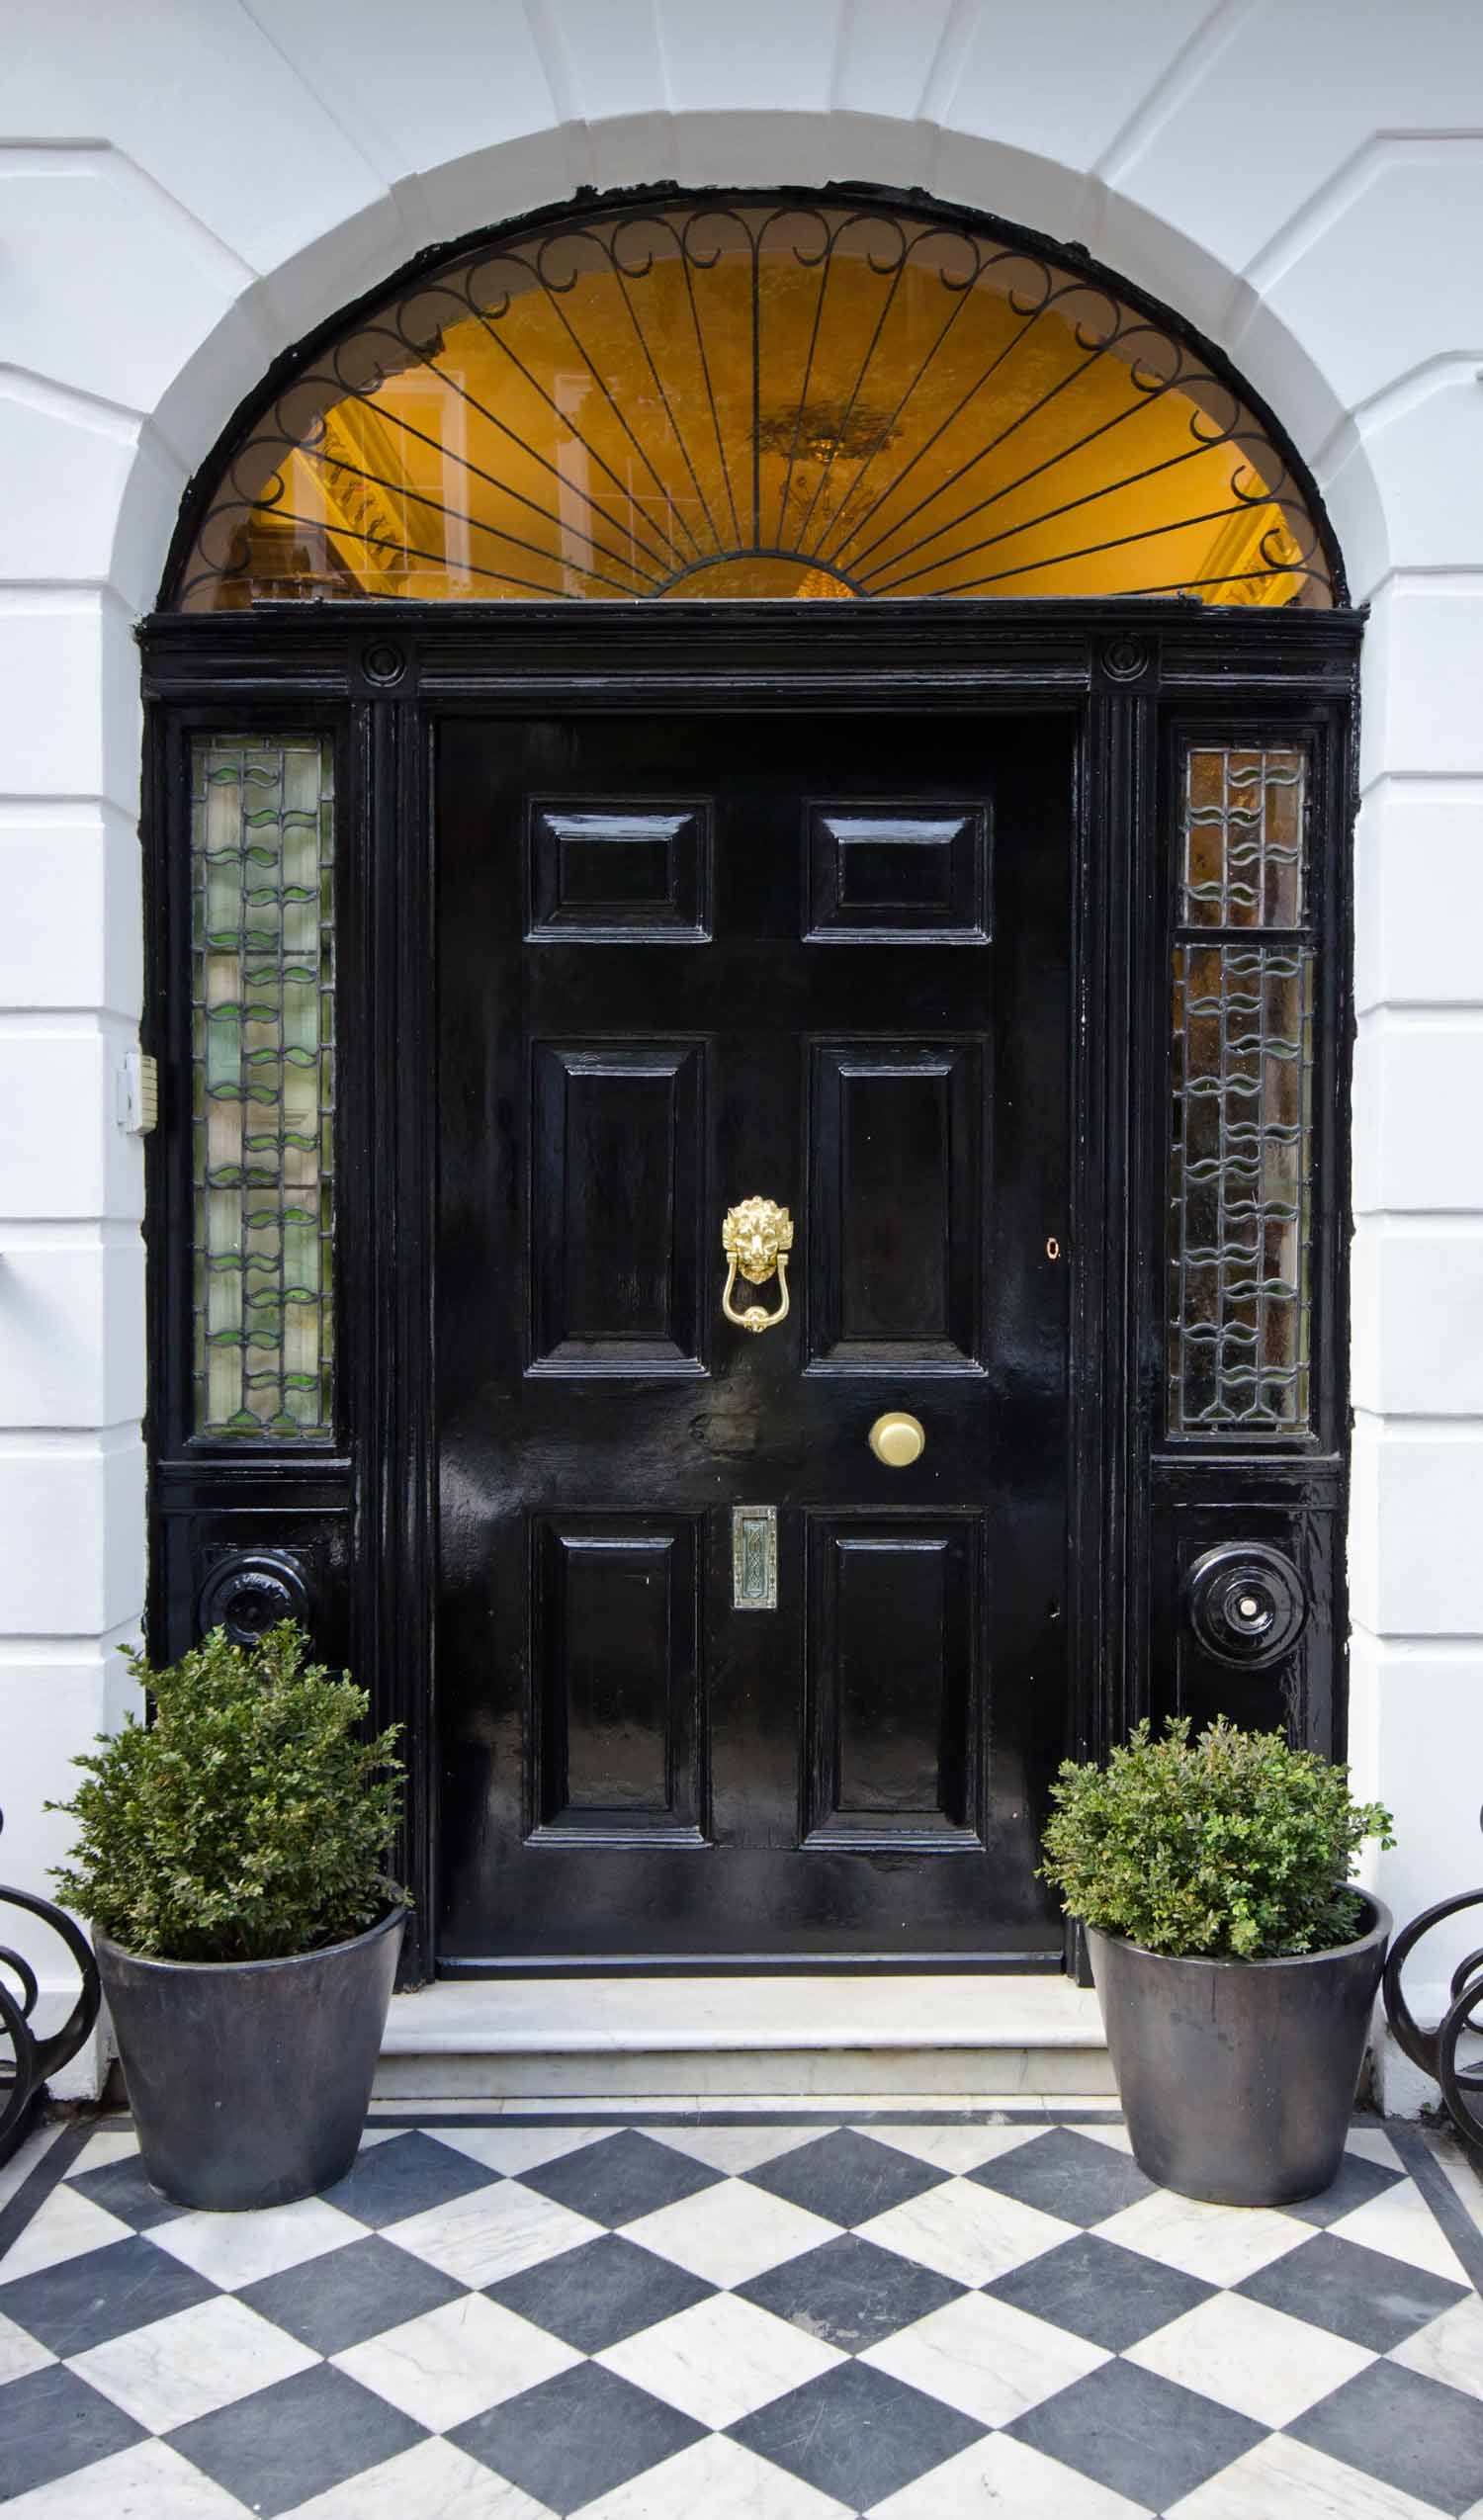 2 French black door with gilding lion head knocker, two boxwoods and black and white chequered floor